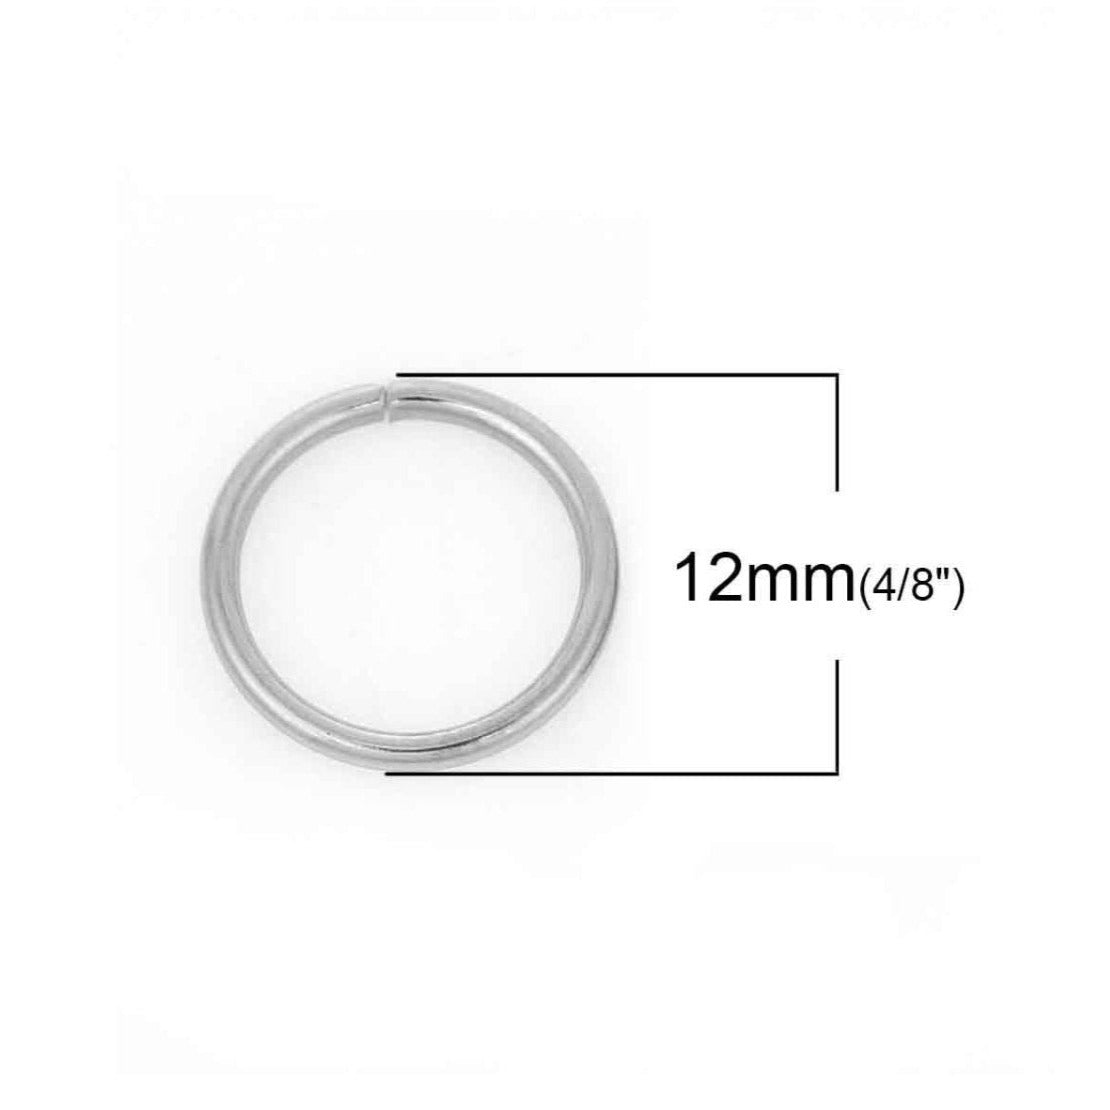 Silver stainless steel jump rings 3mm to 16mm, all gauges